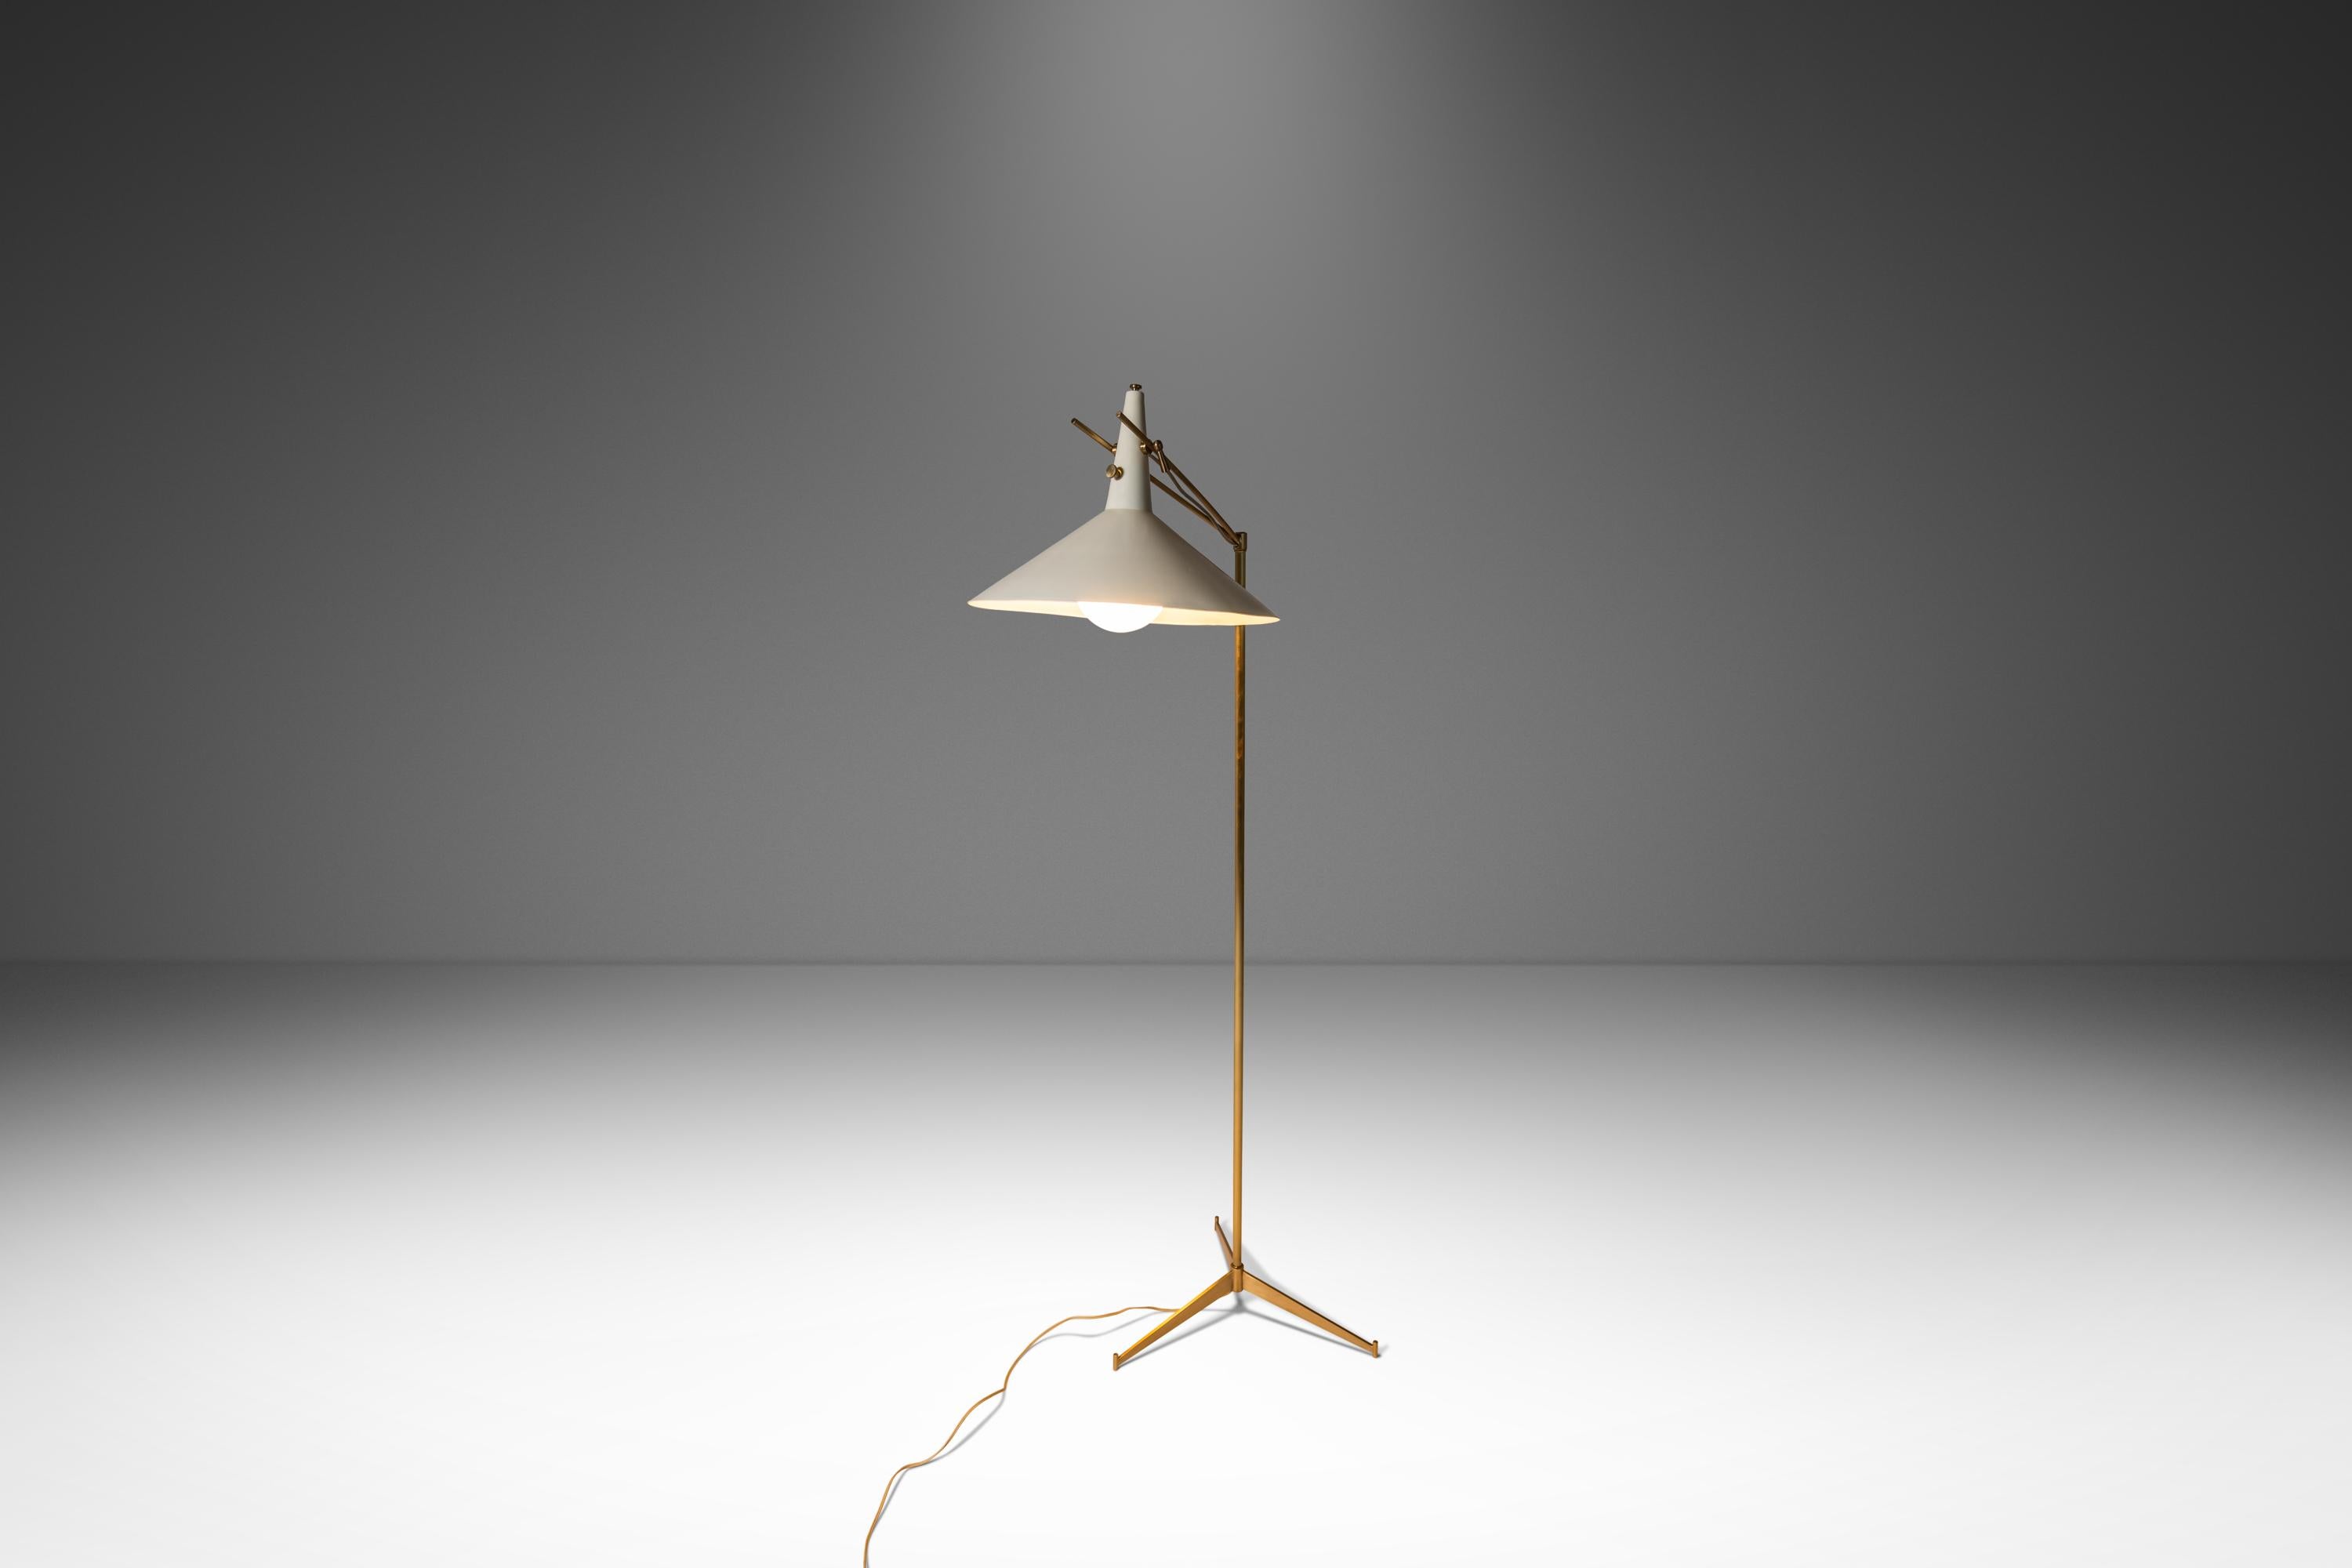 Metal Mid-Century Model E-11 Floor Lamp by Paul McCobb for Directional, USA, c. 1950's For Sale